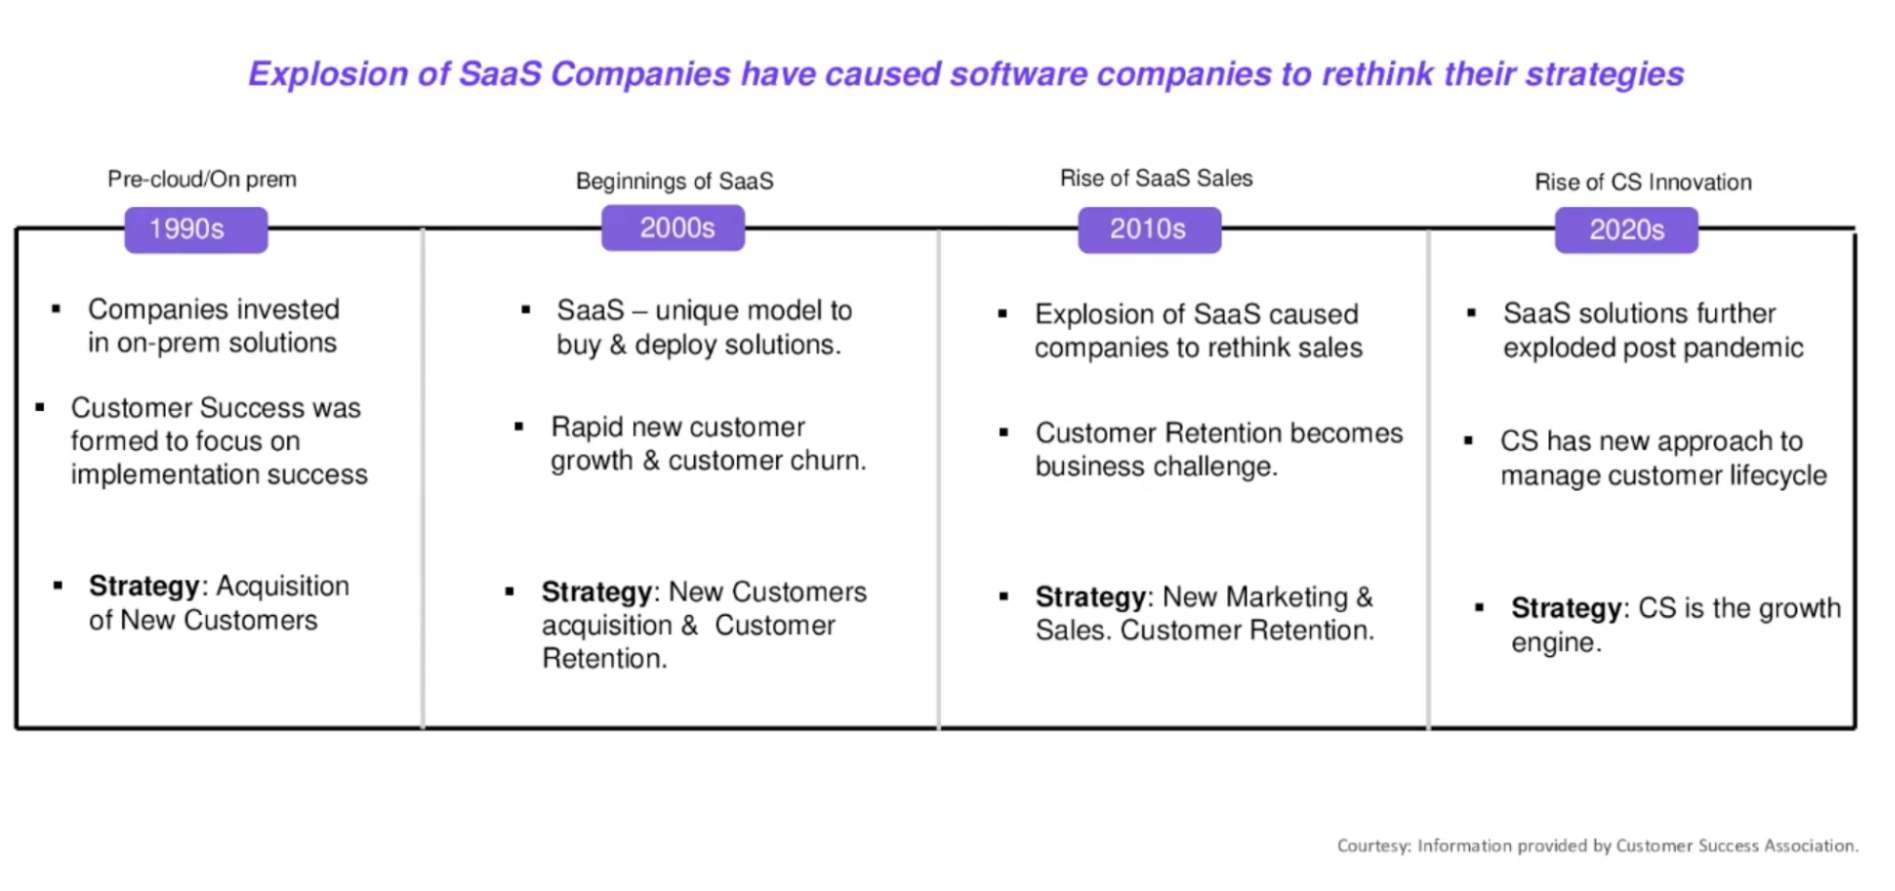 The evolution of SaaS companies have caused software companies to re-think their strategies